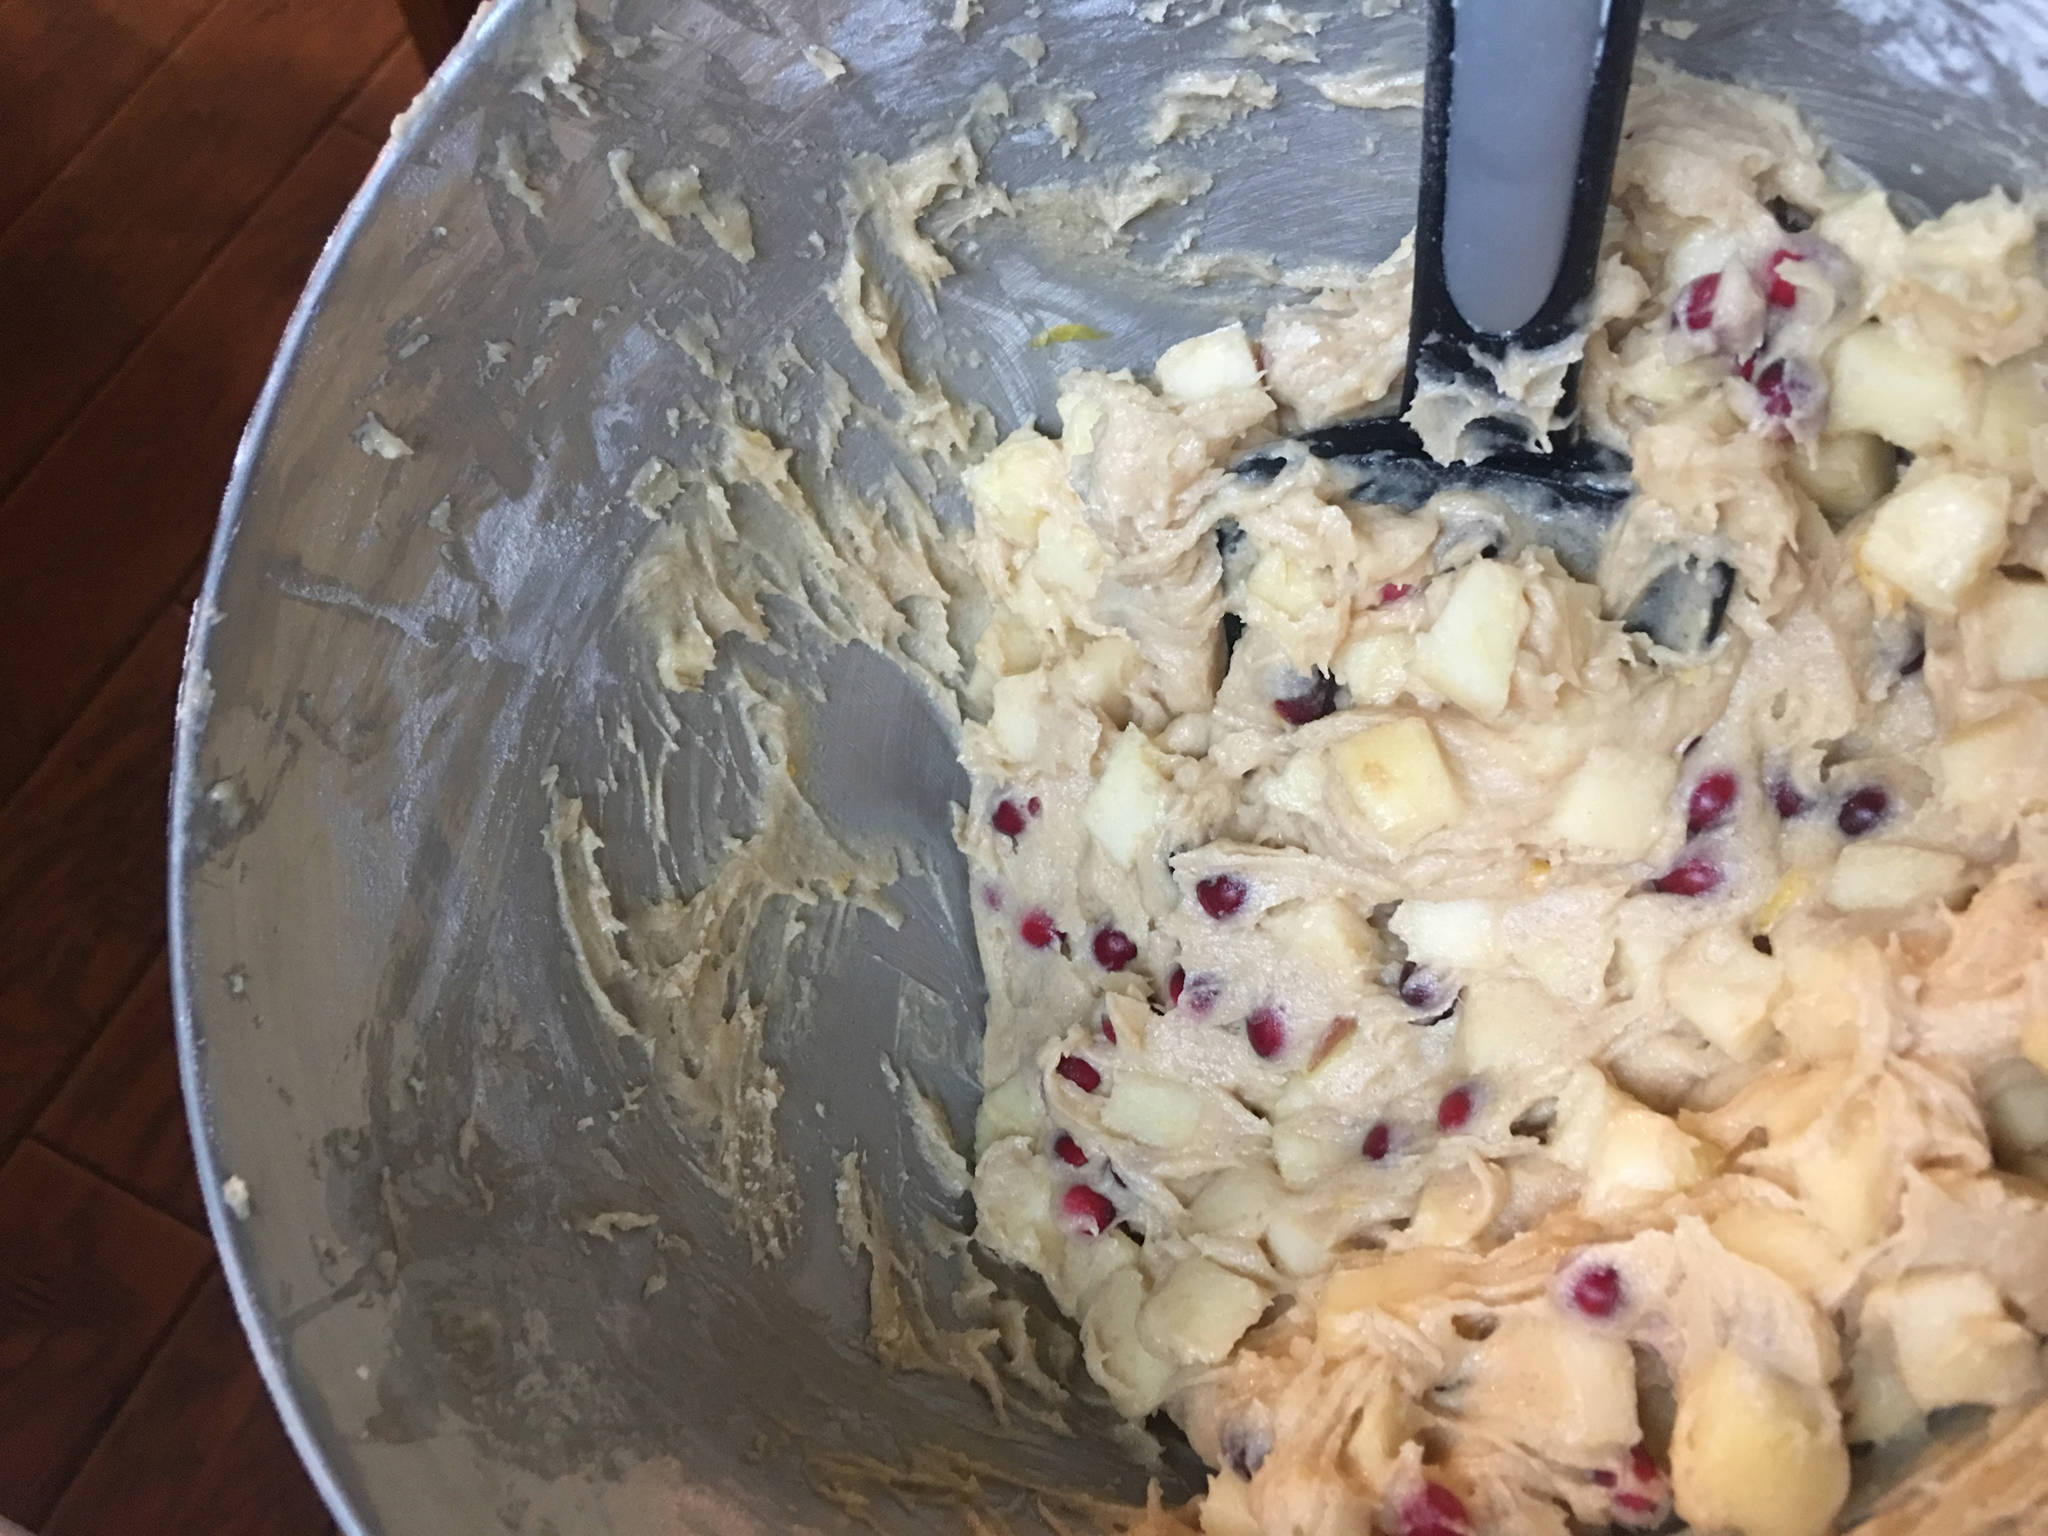 Erin Anais Heist mixes bog cranberries (Vaccinium oxycoccos) with apples, butter and sugar for a loaf of bread in her kitchen on Oct. 14, 2018. (Erin Anais Heist | For the Juneau Empire)